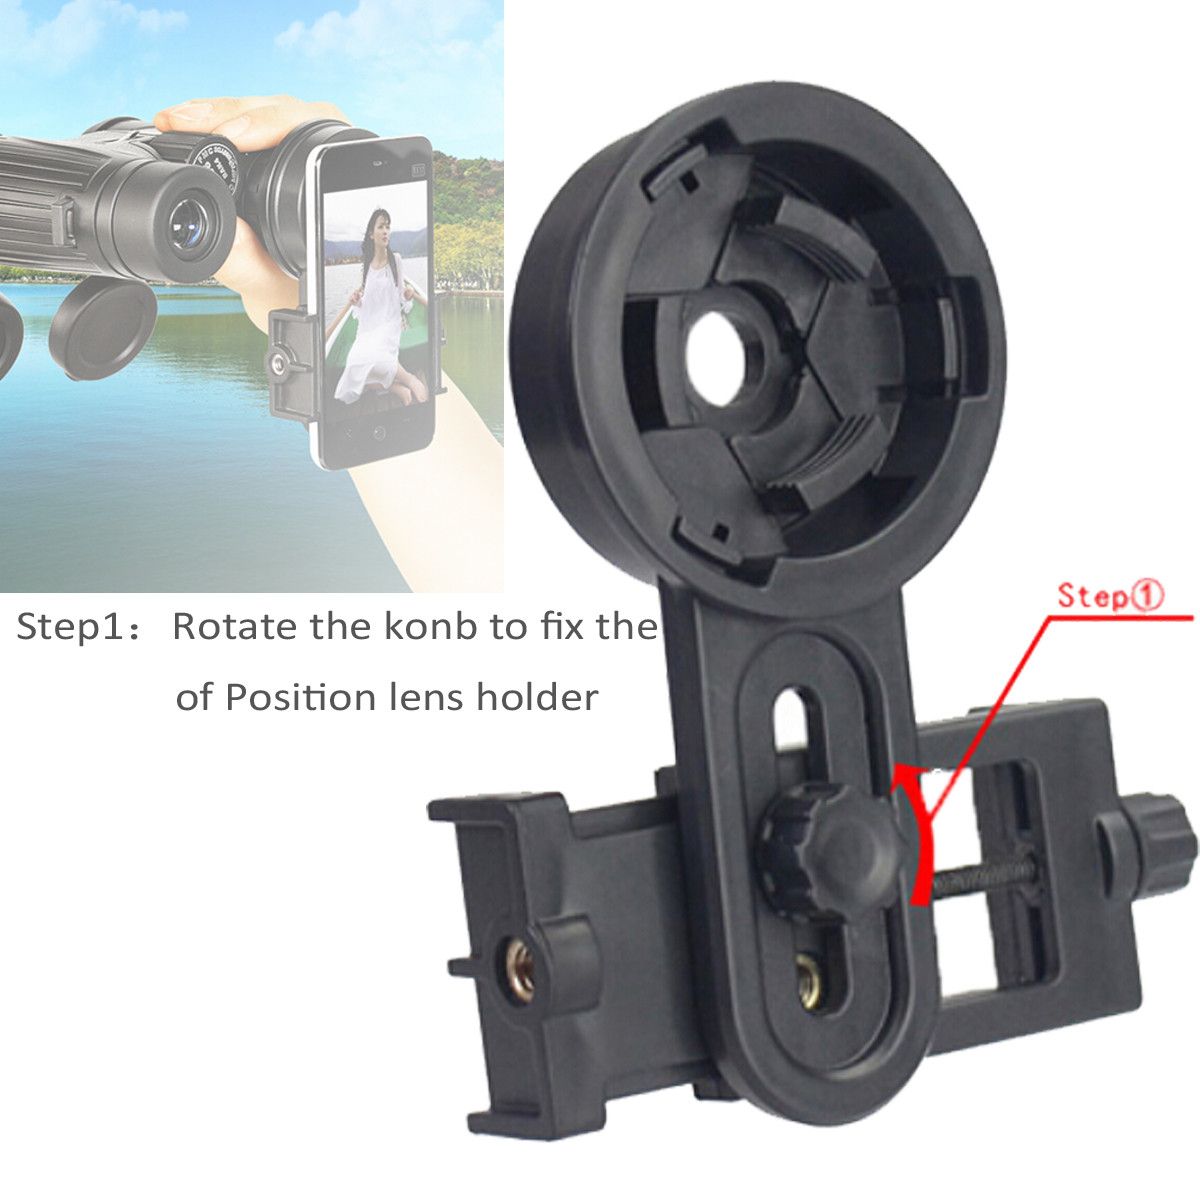 Universal-Astronomical-TelescopE-mount-Holder-Adapter-Clip-For-Smartphone-Camera-1058374